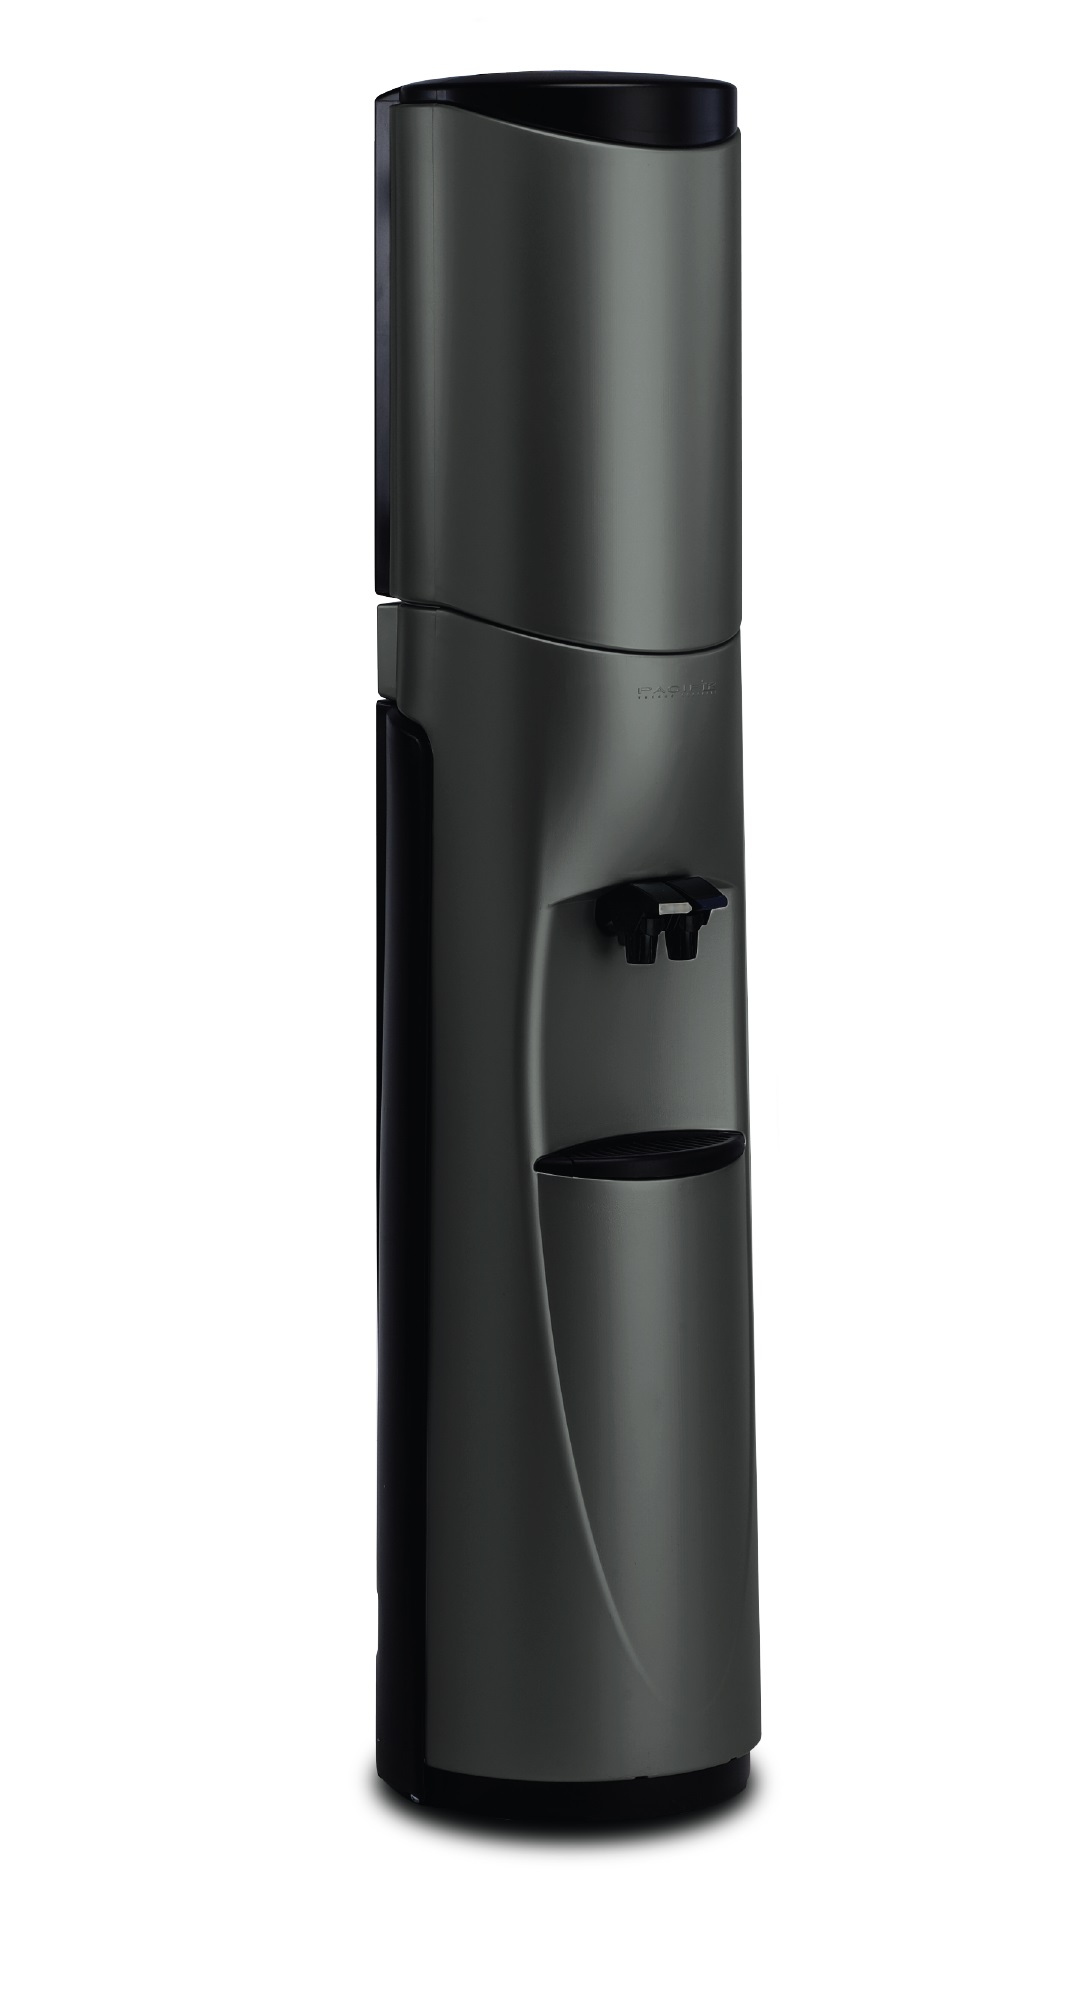 Pacifik Water Cooler - Charcoal with Black Trim - New technology for a whole new kind of bottled water cooler, Room Temperature & Cold